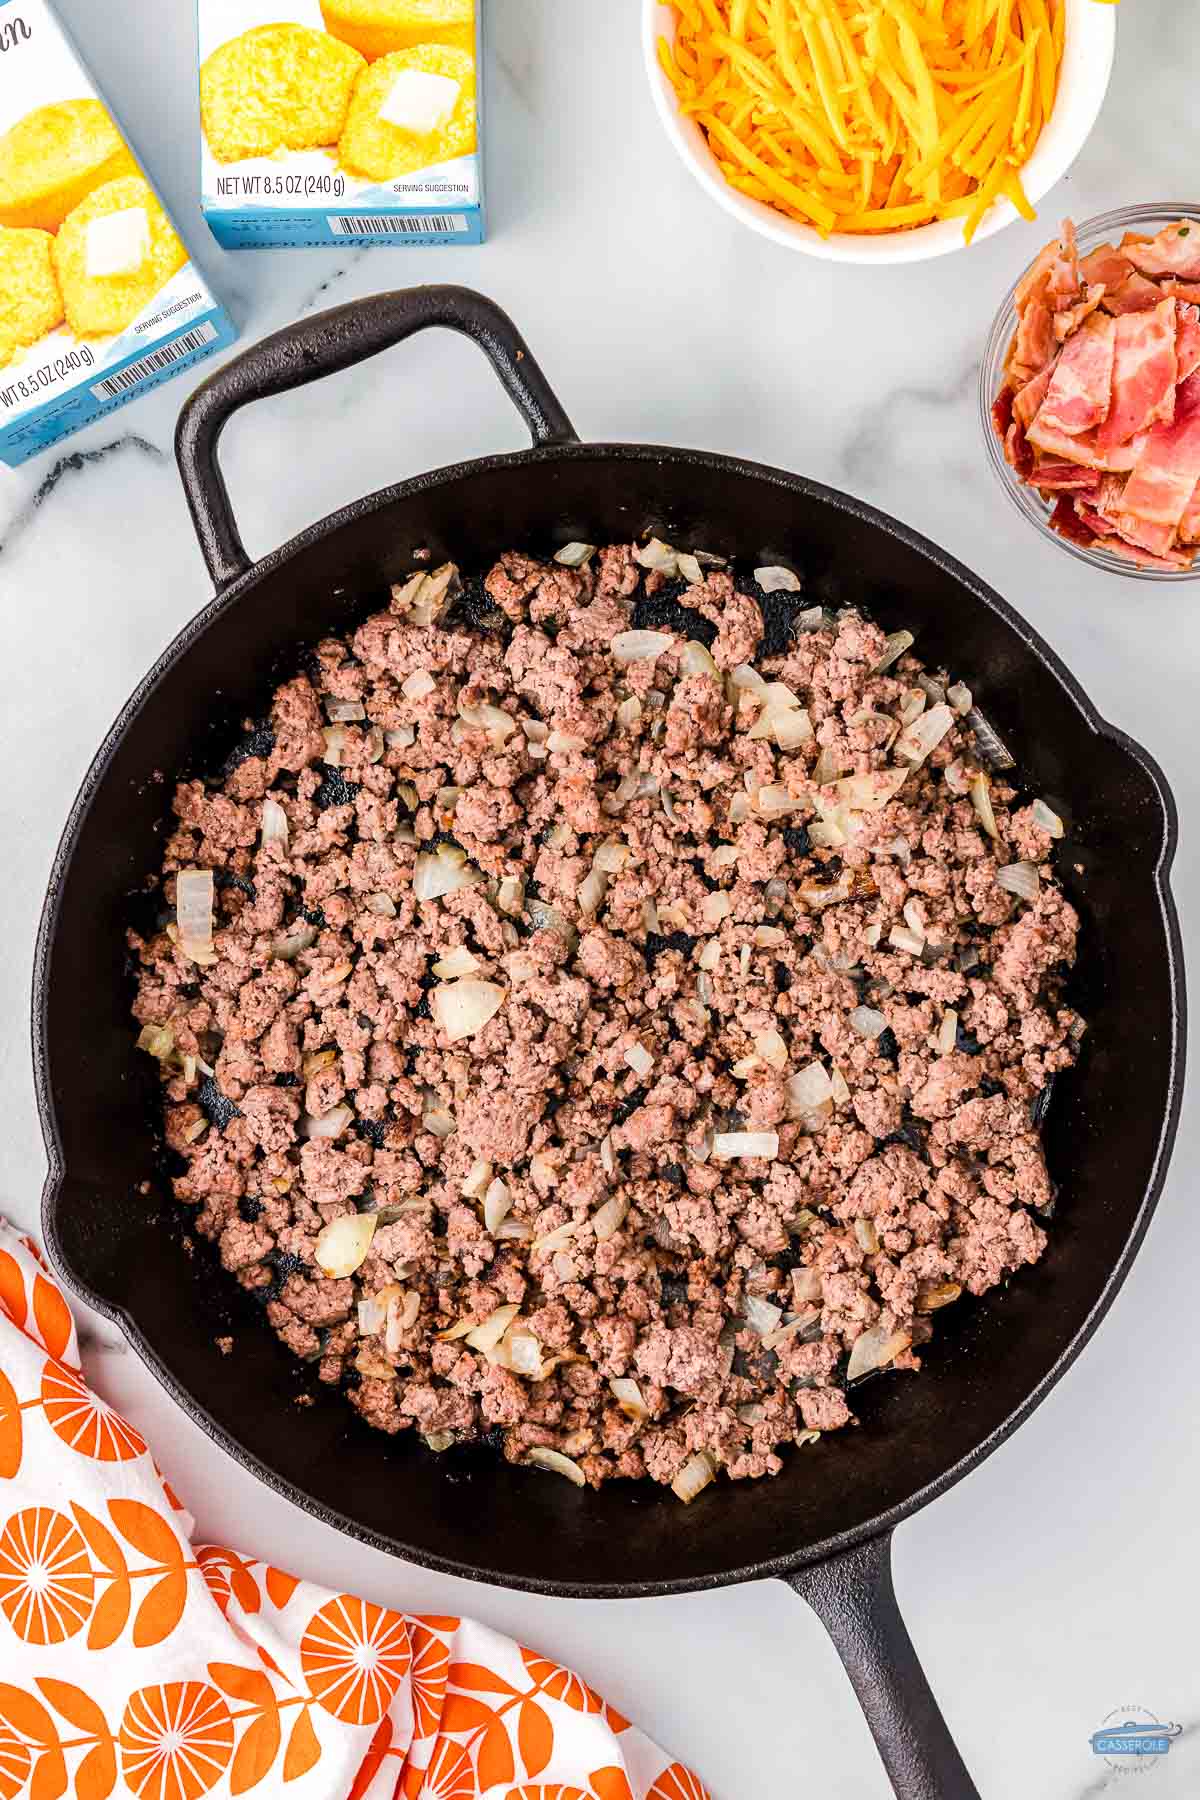 cooked ground beef and onions in a cast iron skillet